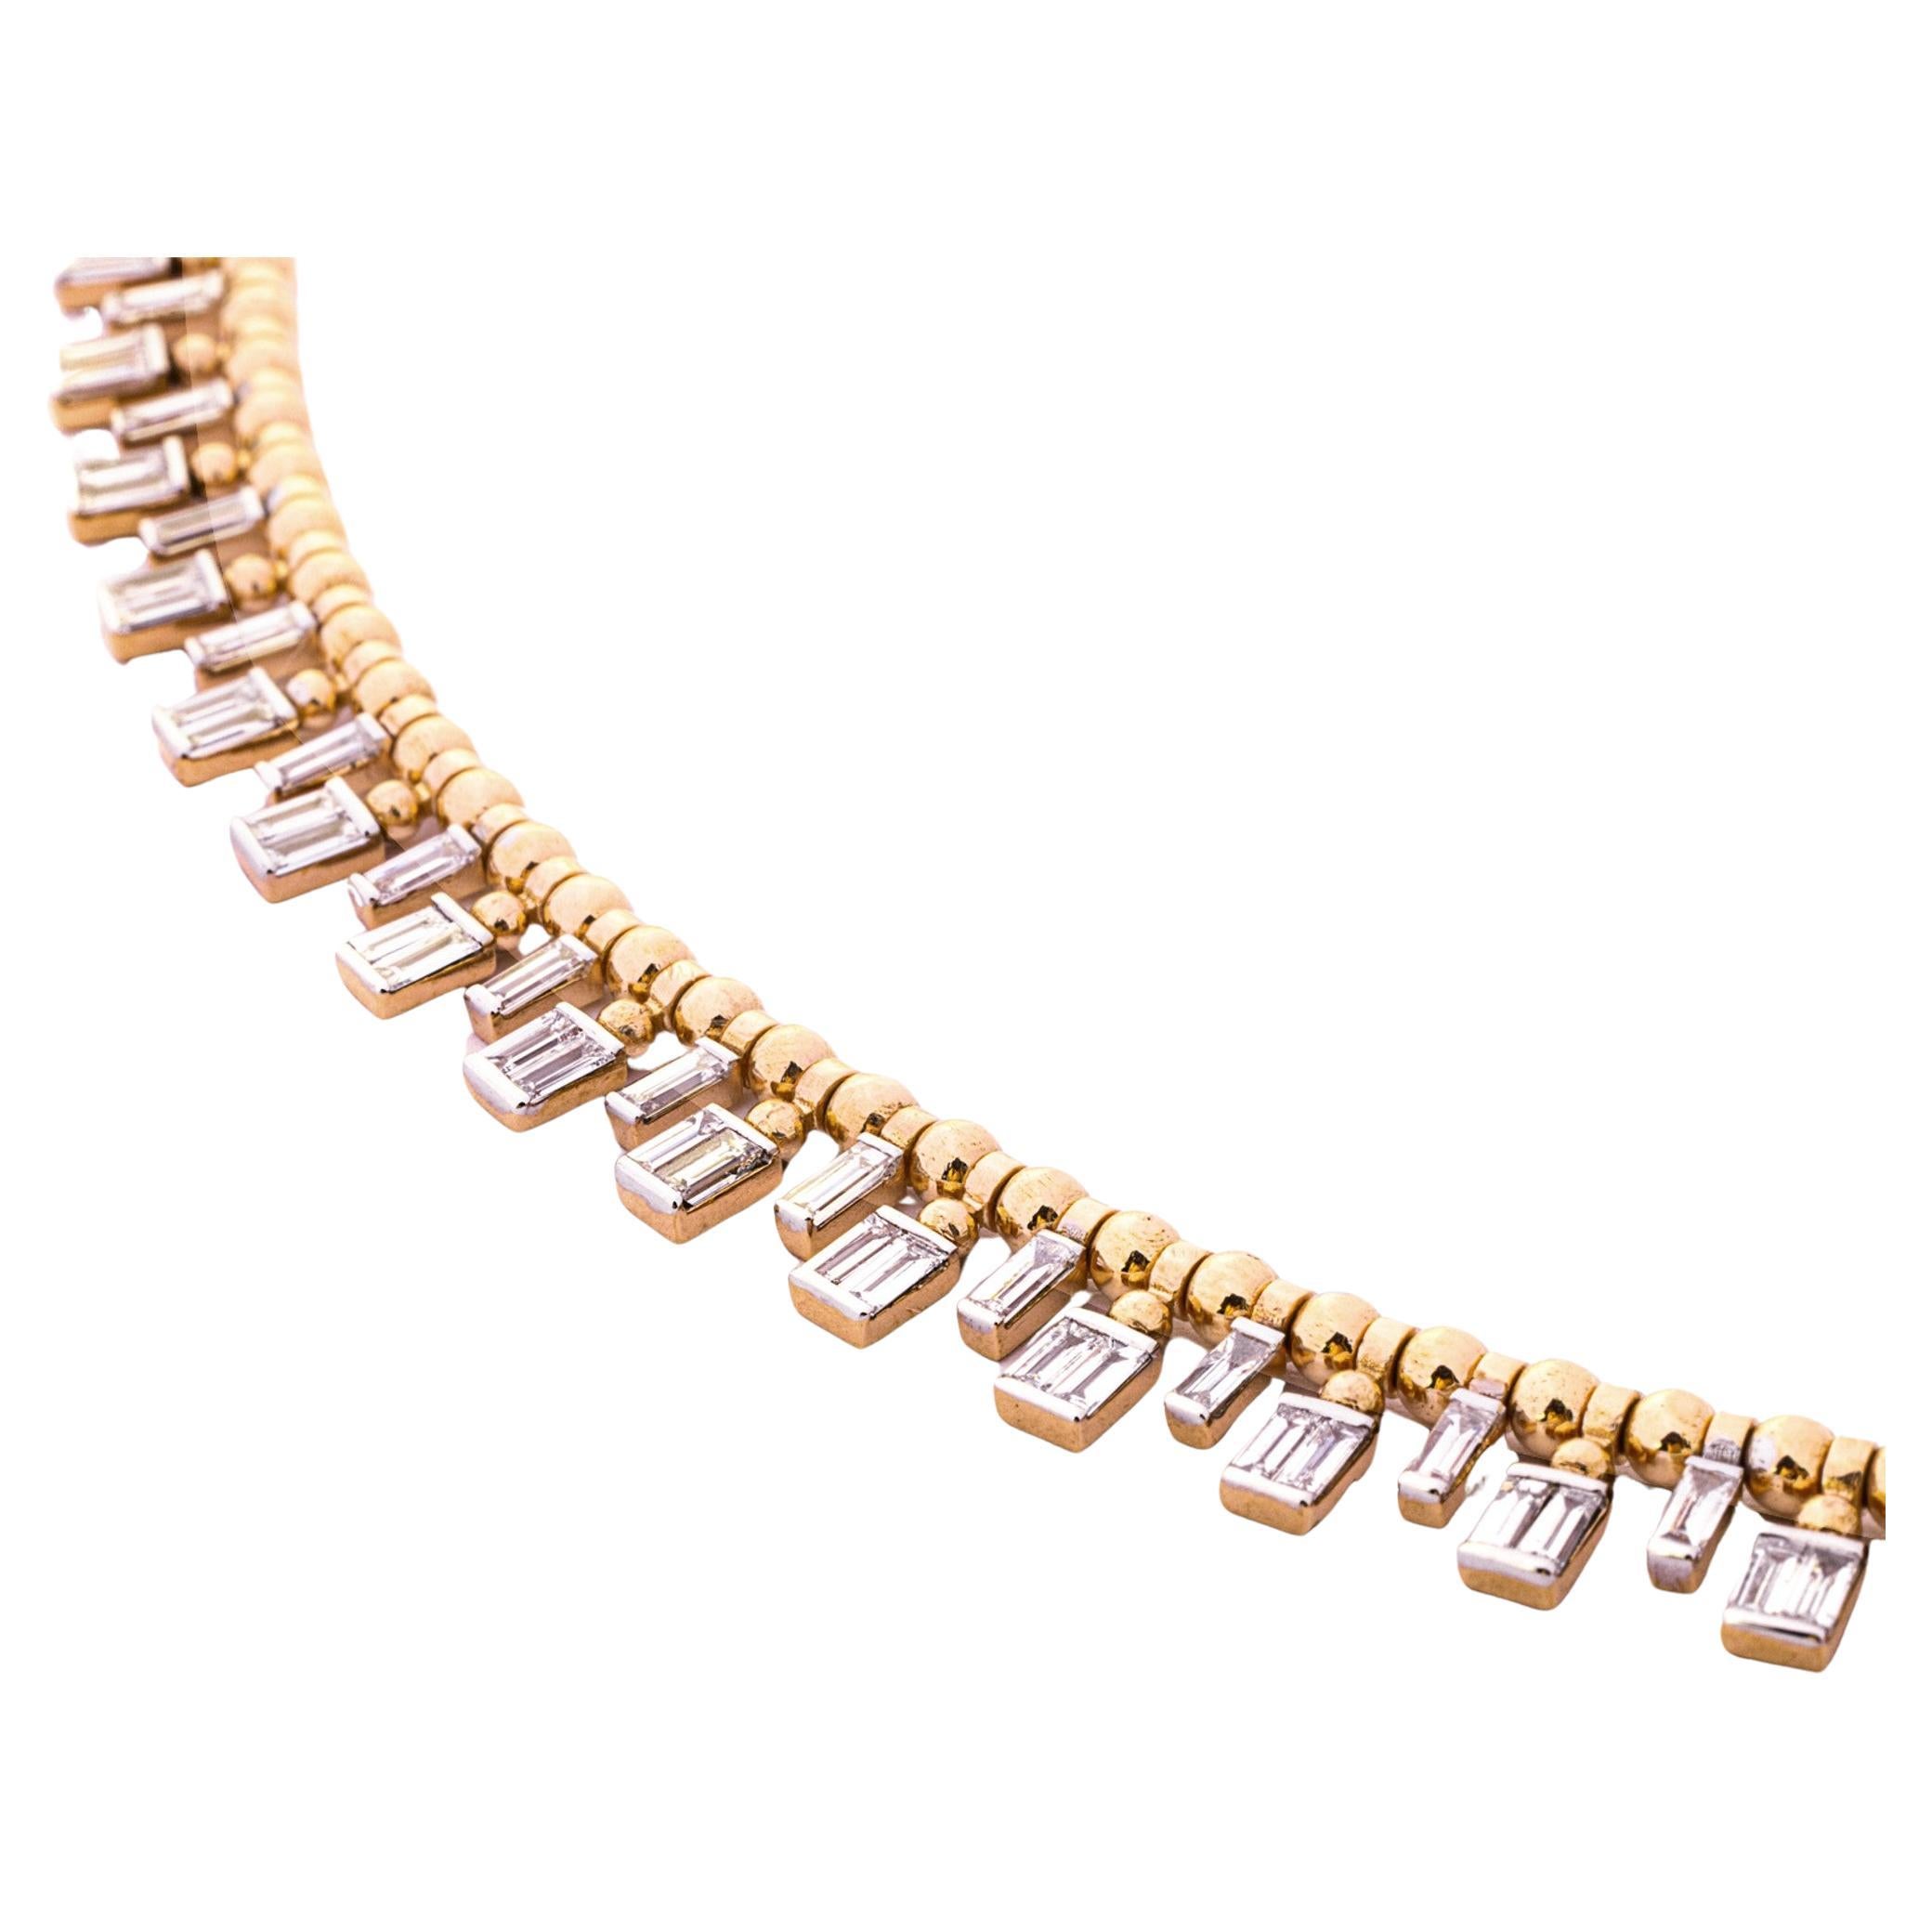 Alex Jona design collection, hand crafted in Italy, 18 karat rose gold choker necklace set with 2.30 carats of champagne diamond baguettes.

Alex Jona jewels stand out, not only for their special design and for the excellent quality of the